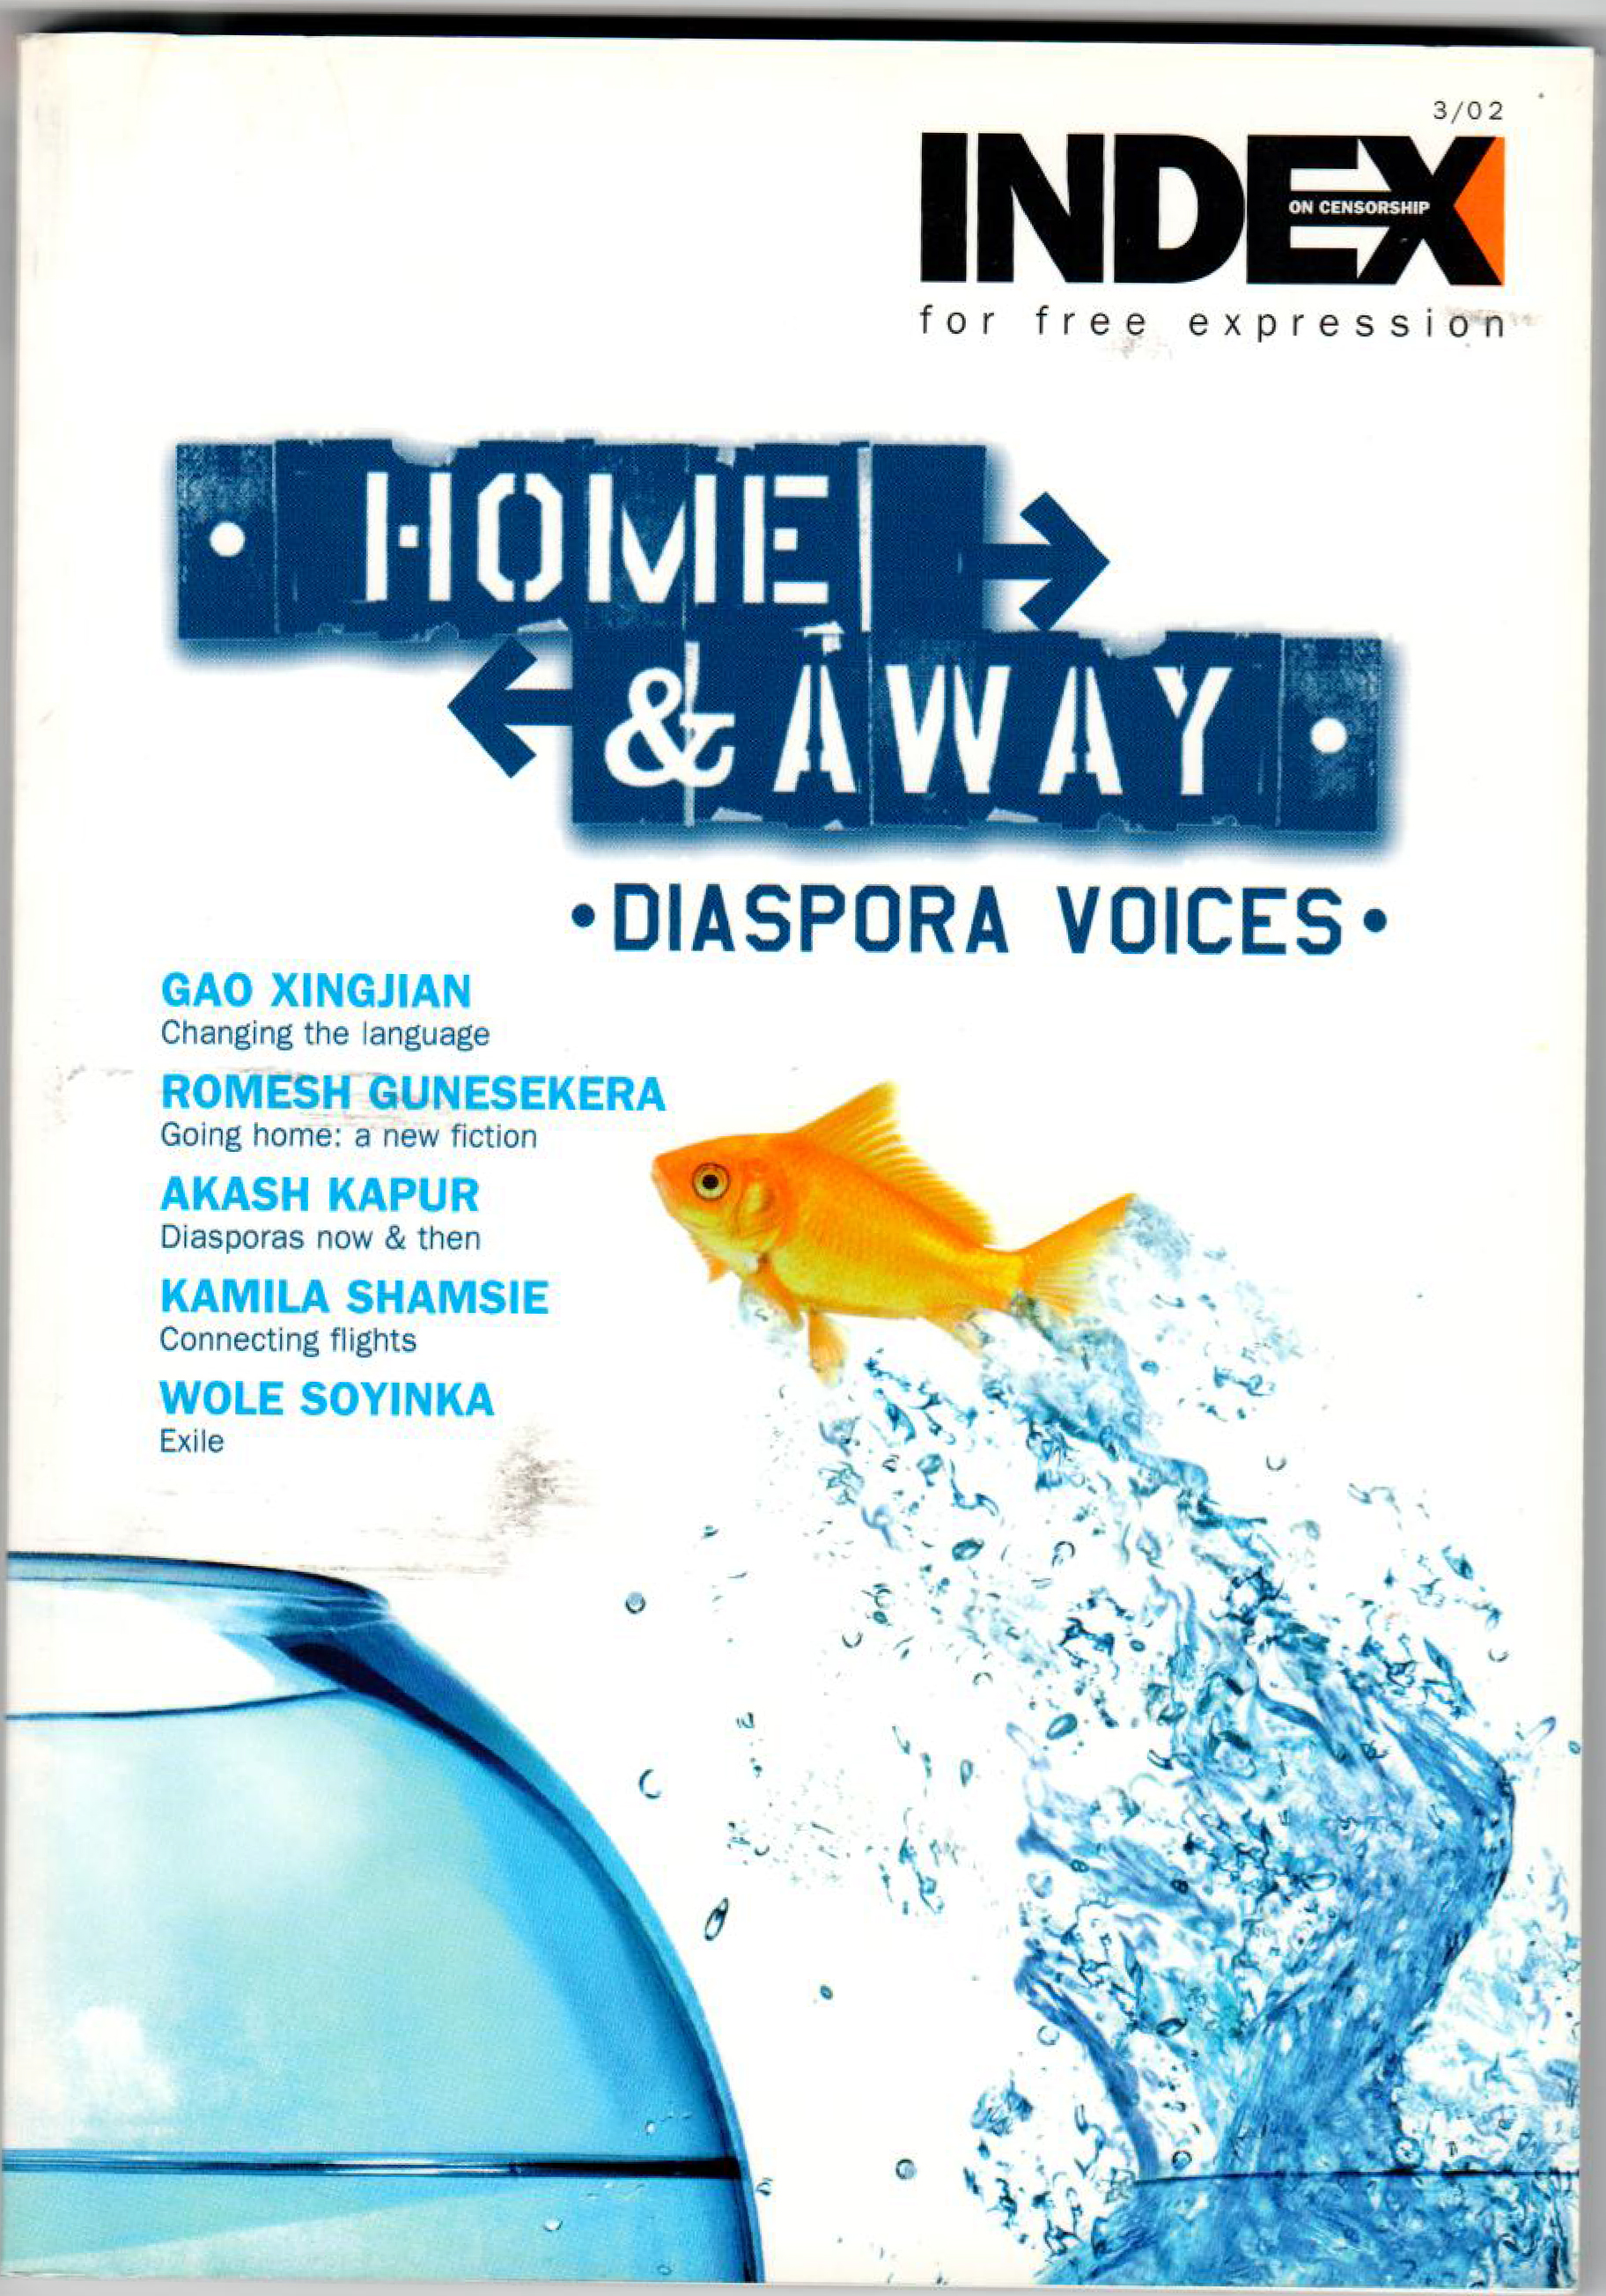 Home and away: Diaspora voices, the autumn 2002 issue of Index on Censorship magazine.